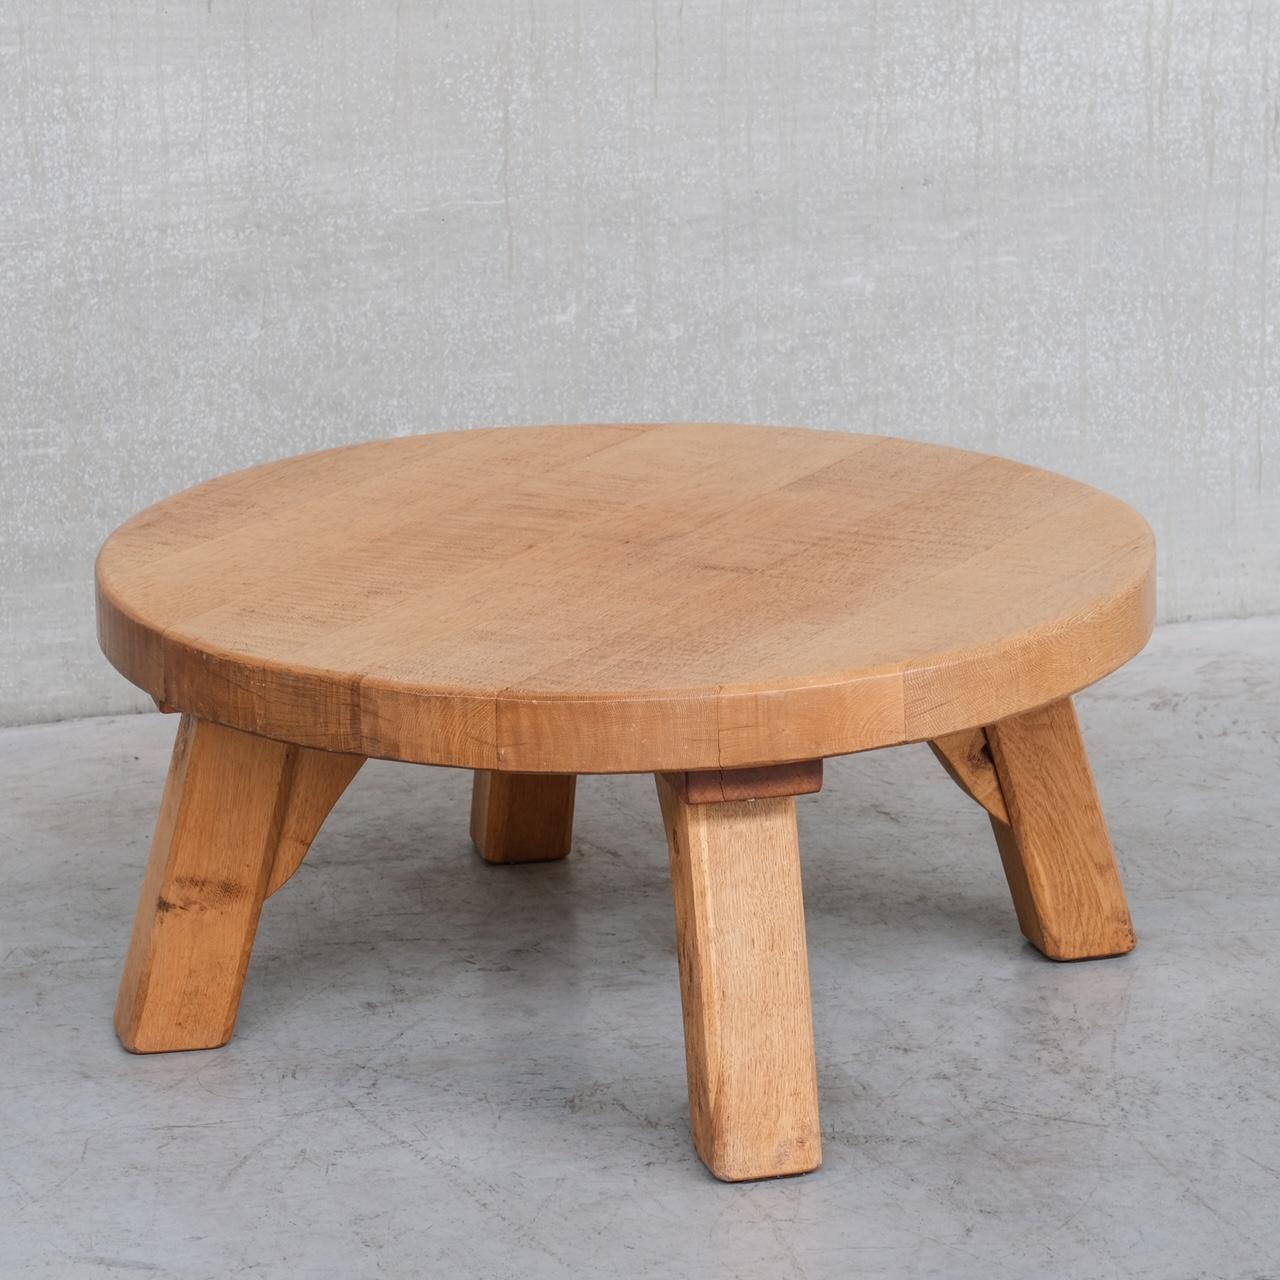 A large brutalist coffee table. 

Blonde oak. 

Holland, c1970s. 

Good condition, some scuffs and wear commensurate with age. 

Thick chunky surface and legs. 

Location: Belgium Gallery. 

Dimensions: 30 H x 13 D x 21 W in cm.